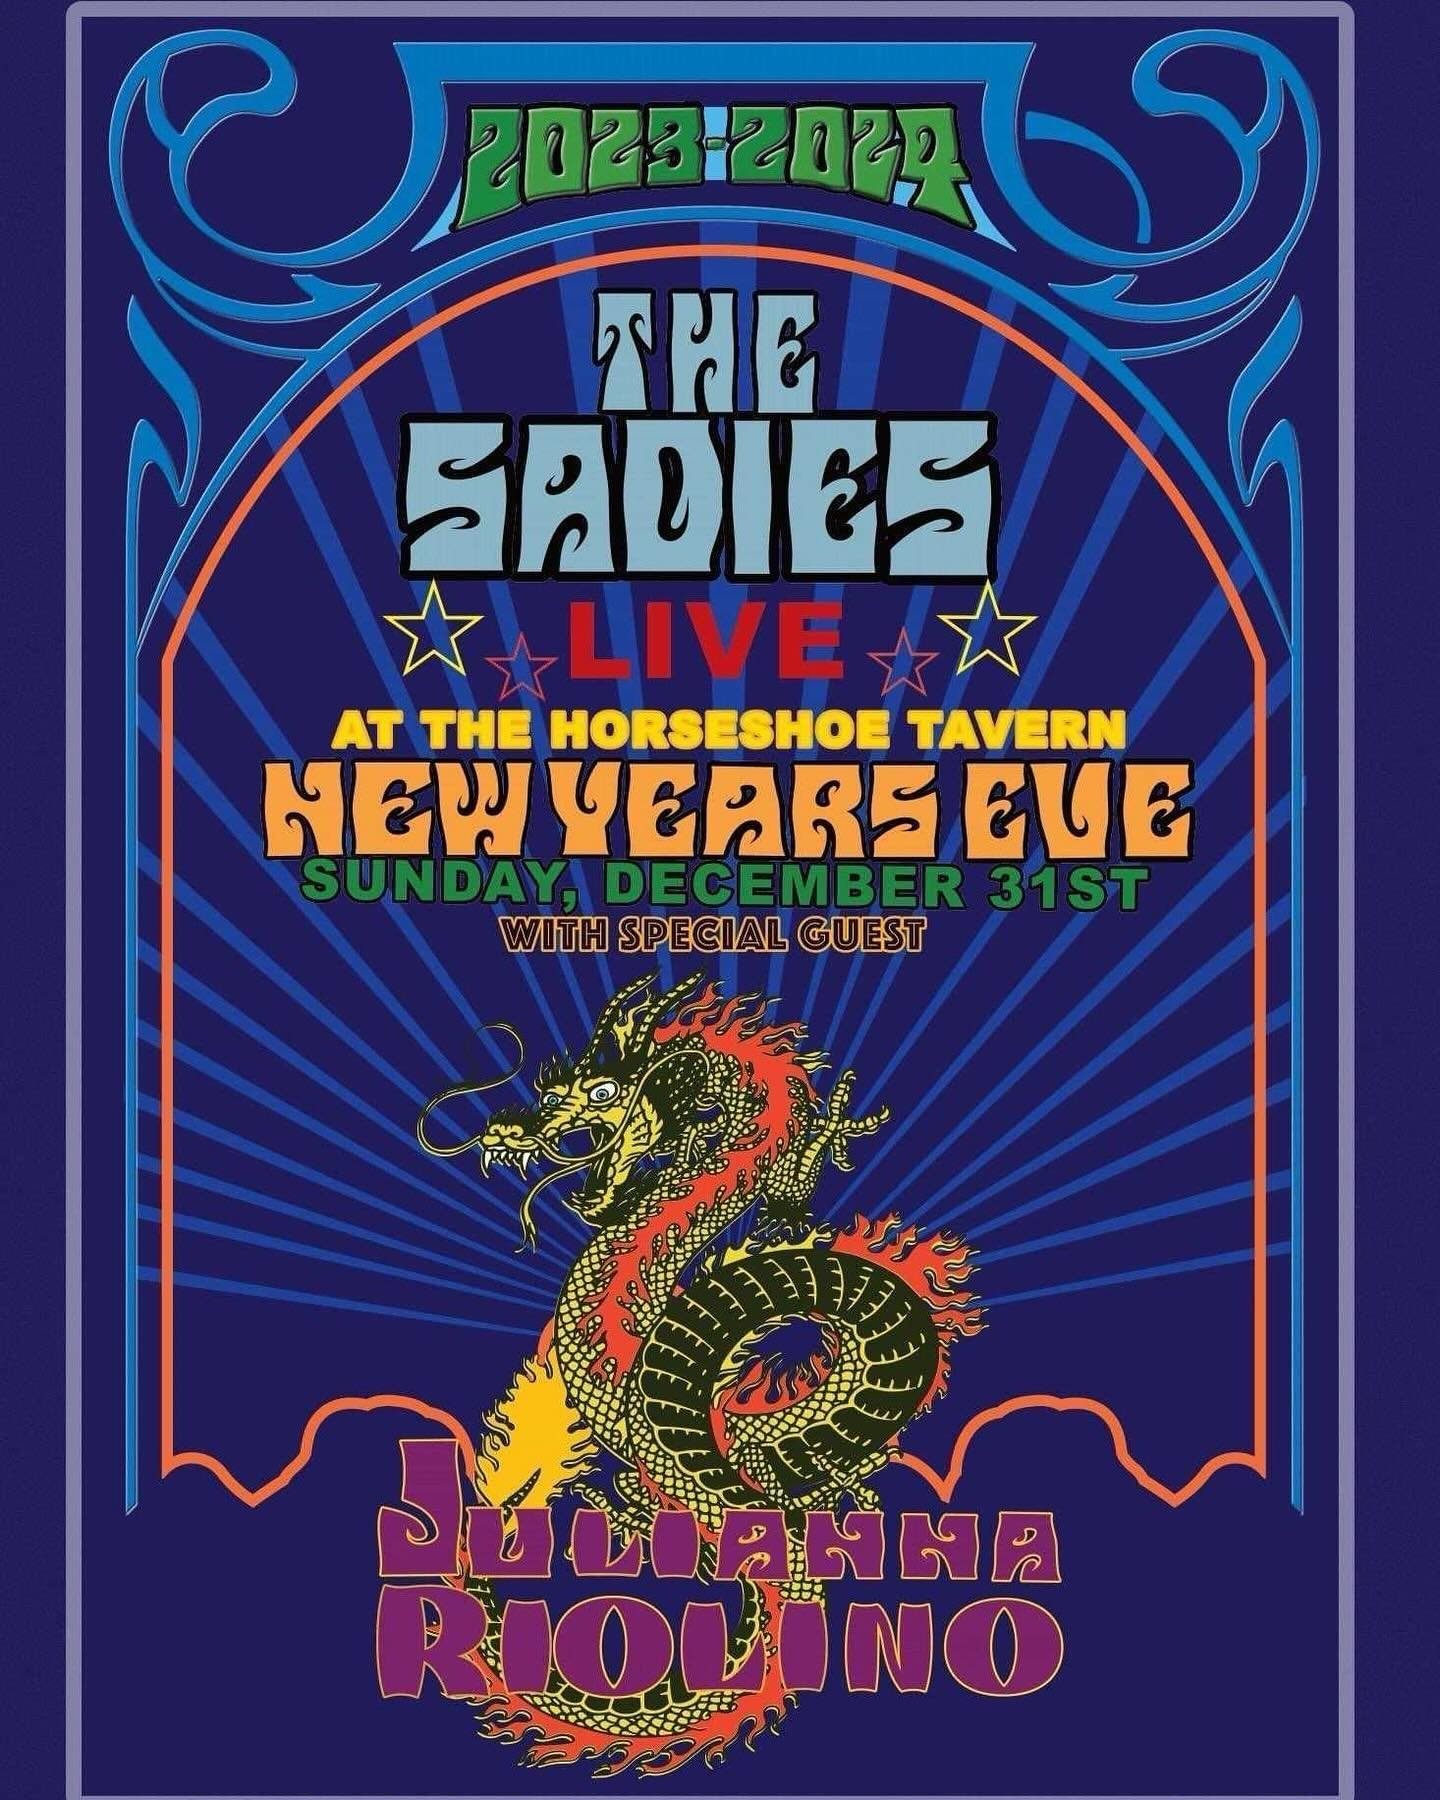 We hope you'll join The Sadies for their annual New Years Eve show, with very special guest Julianna Riolino at the Shoe.  Doors 9. Showtime 10. 
Tickets: http://www.showclix.com/tickets/TheSadiesNYE